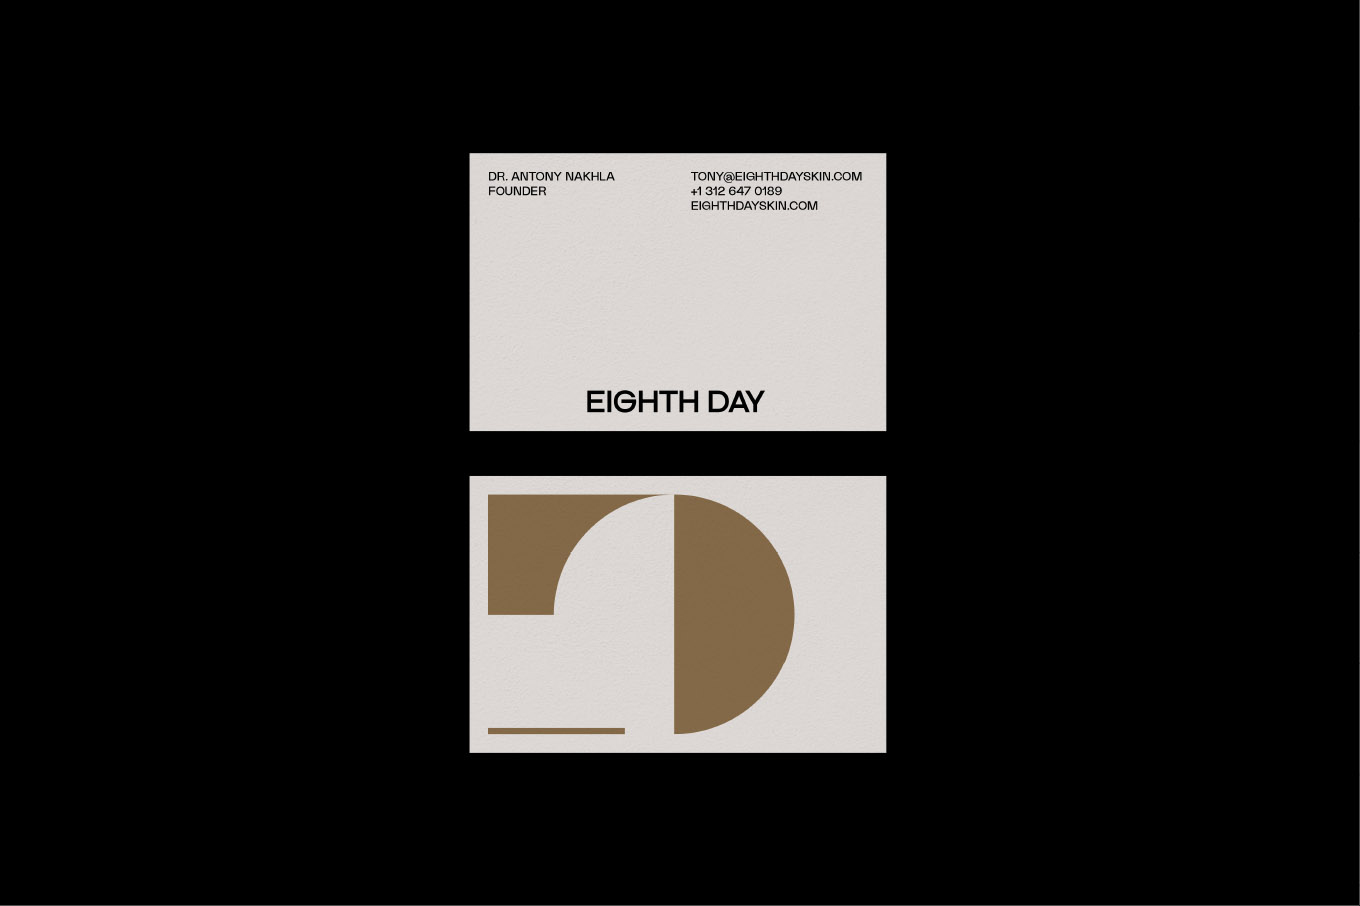 Eighth Day business cards